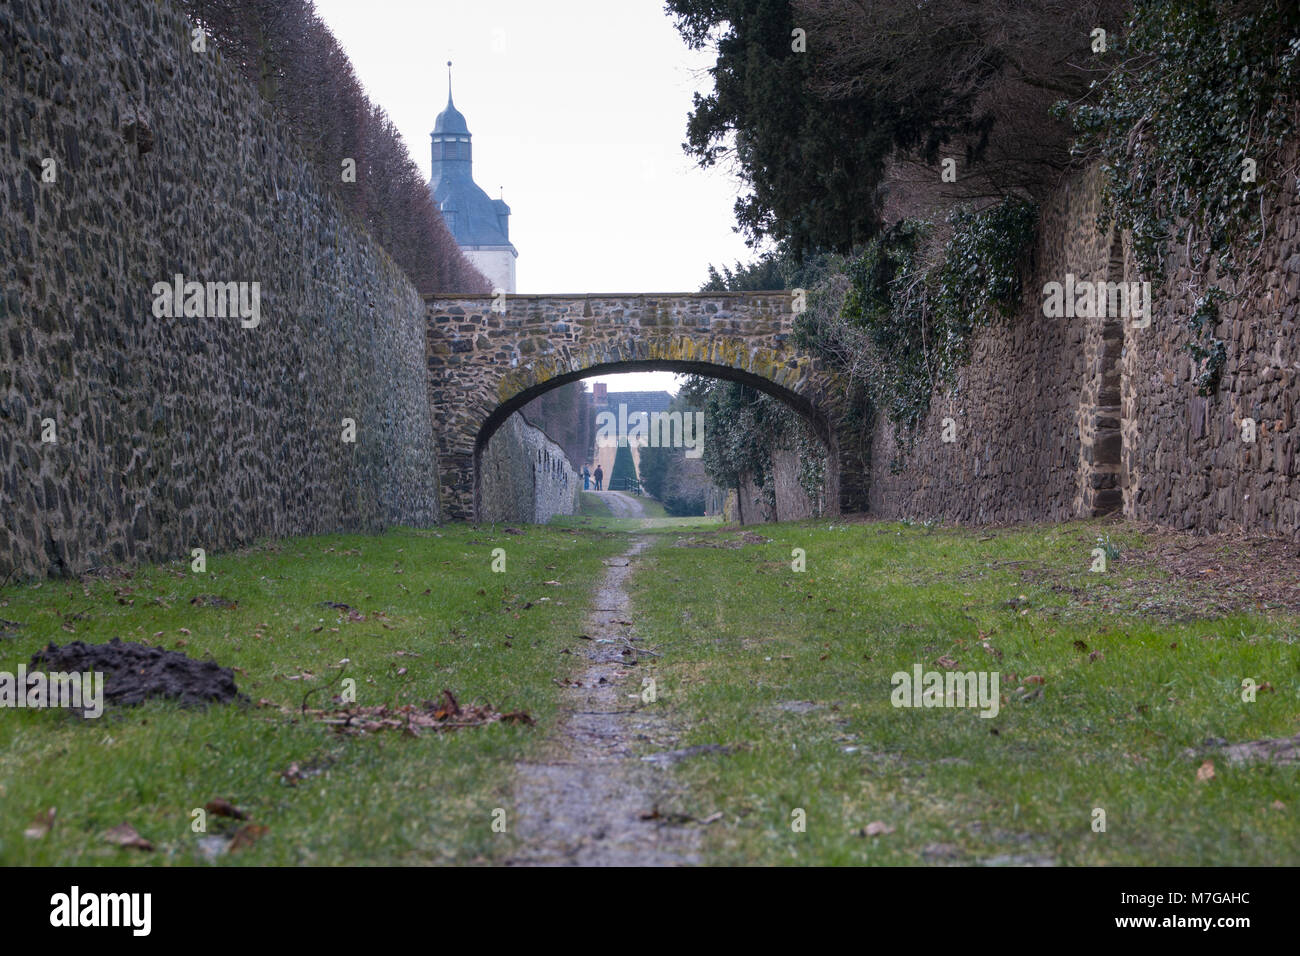 Hundisburg, Germany - March 10,2018: View into the moat of Hundisburg Castle in Saxony-Anhalt, Germany. Stock Photo